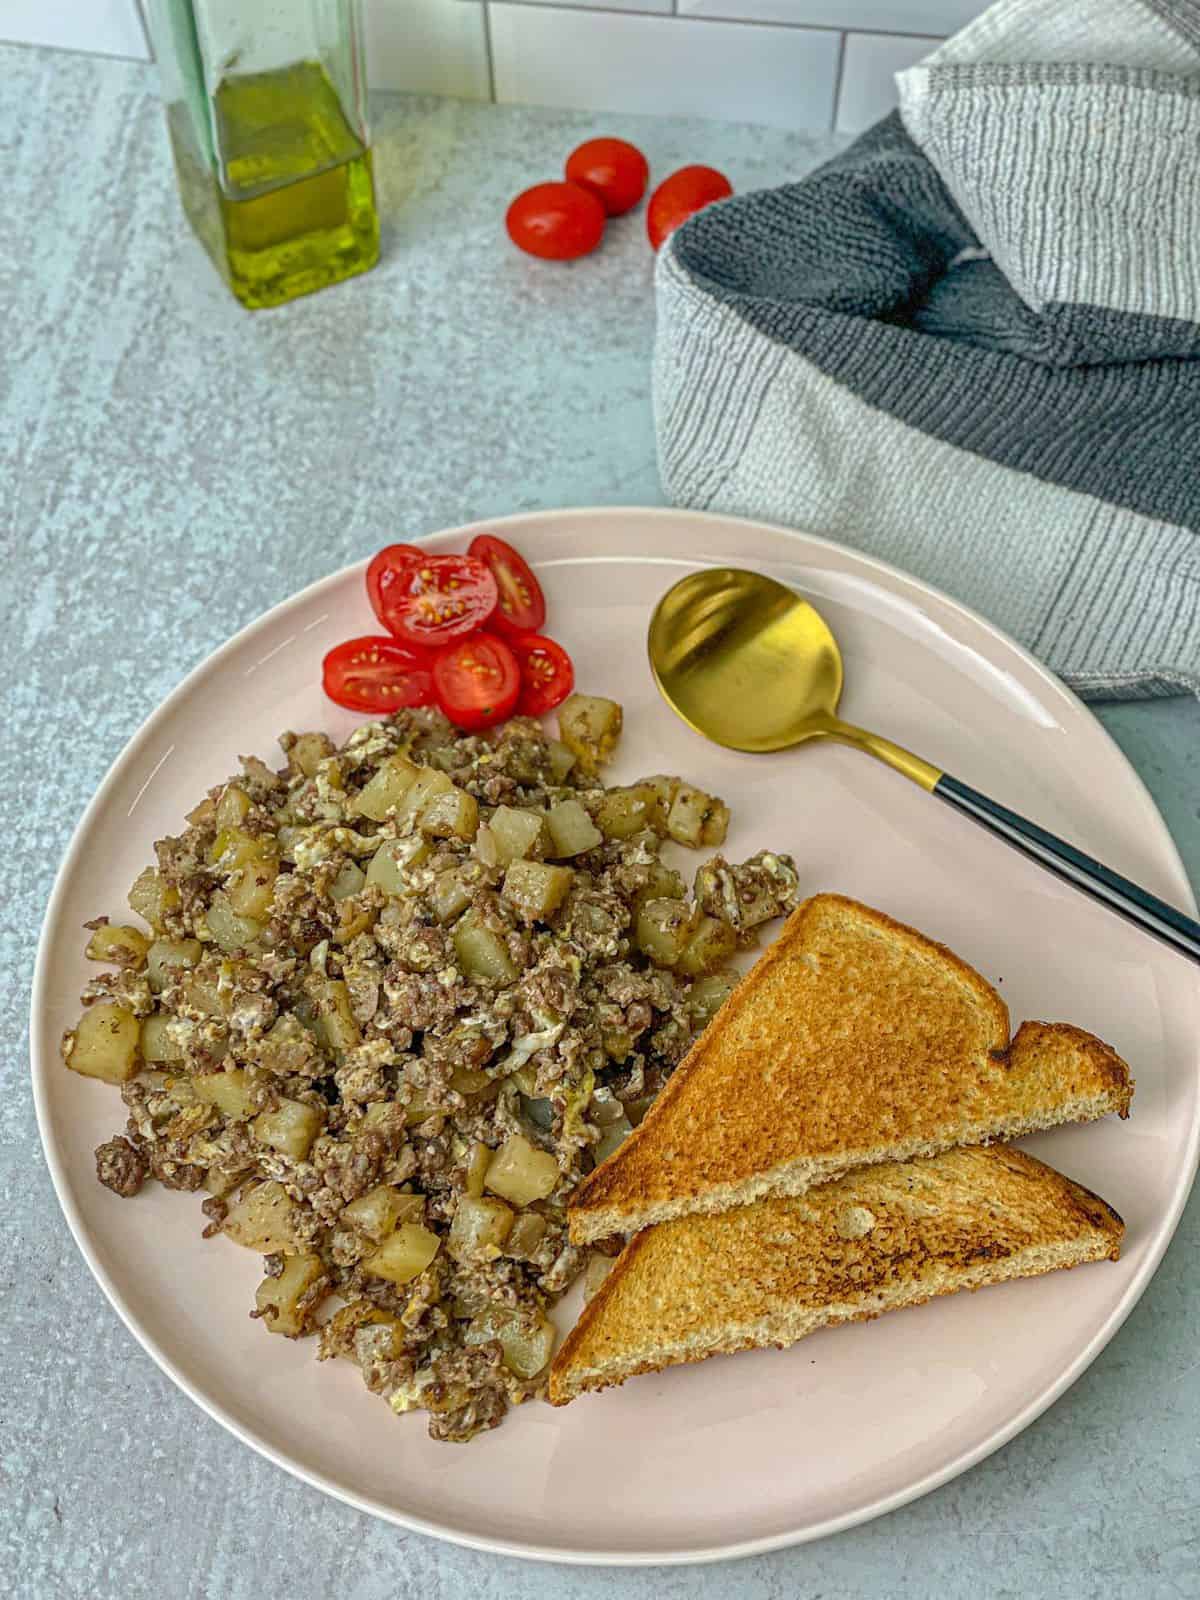 A top view of a large white dish of sautéed spiced beef meat with cubed potatoes, cubed onions, and eggs. It is served with toast bread and halved tomatoes.